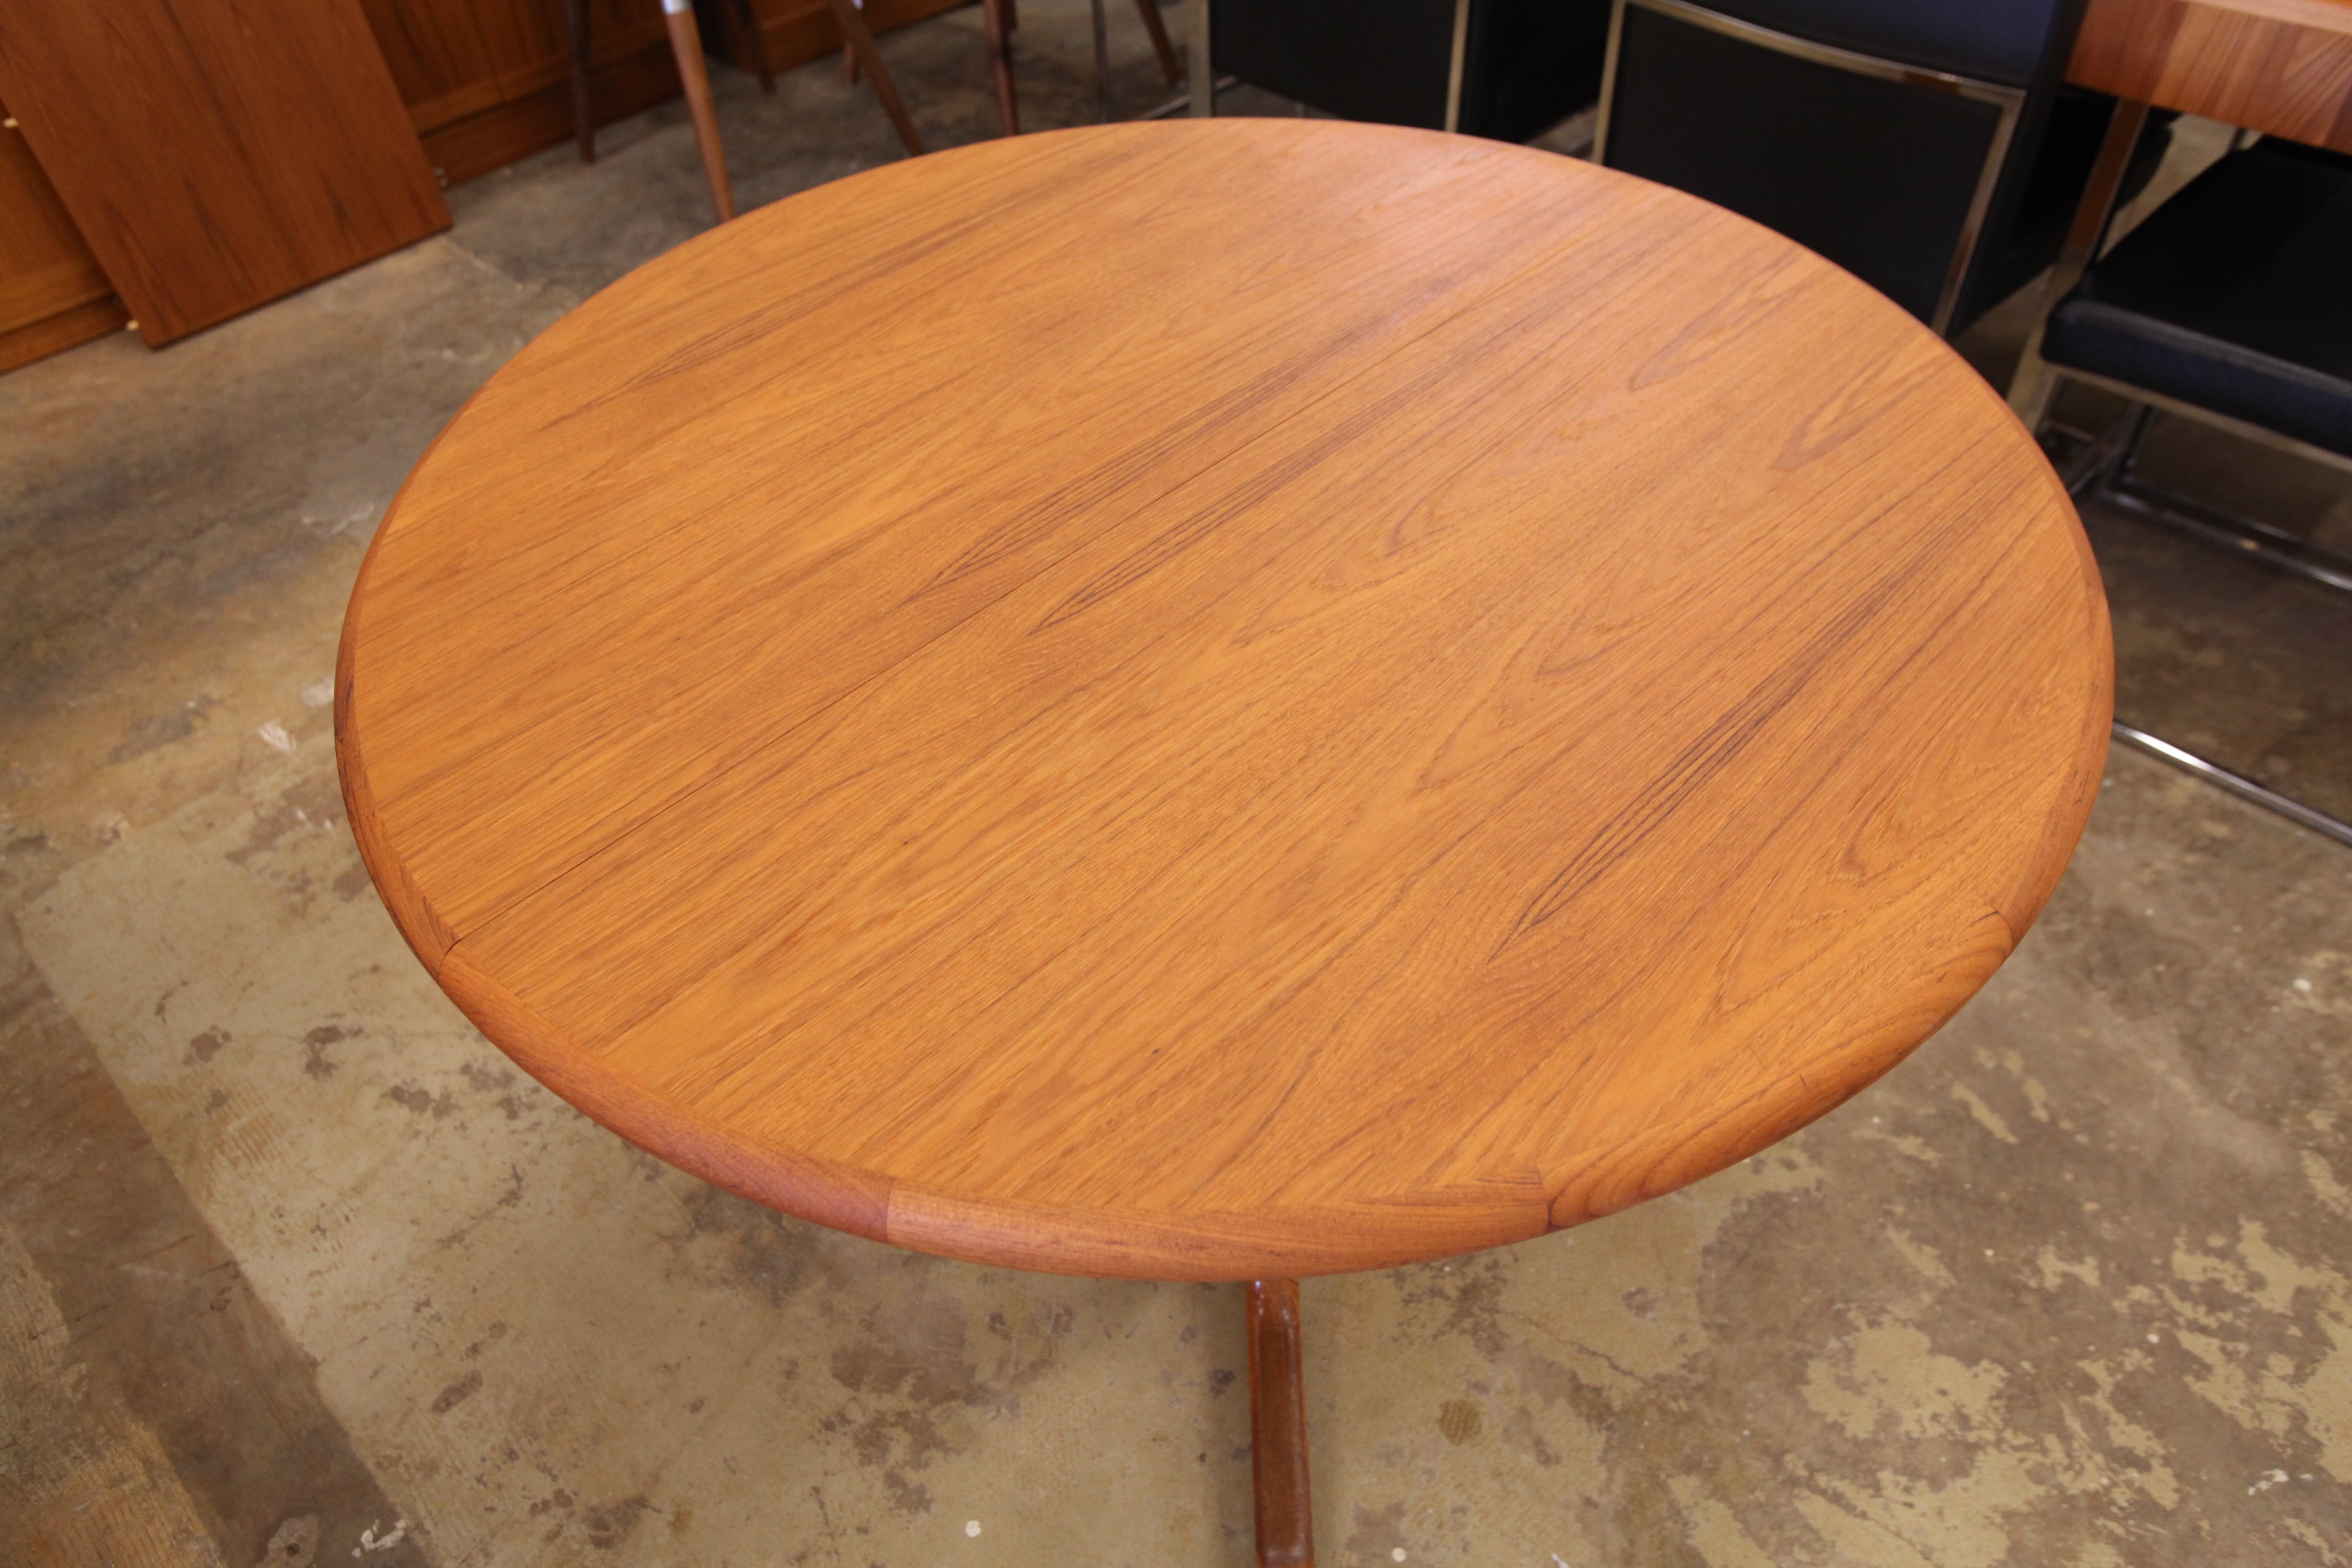 Vintage Round Teak Dining Table with One Leaf (63.5"L x 42"W) (42" Dia Round)